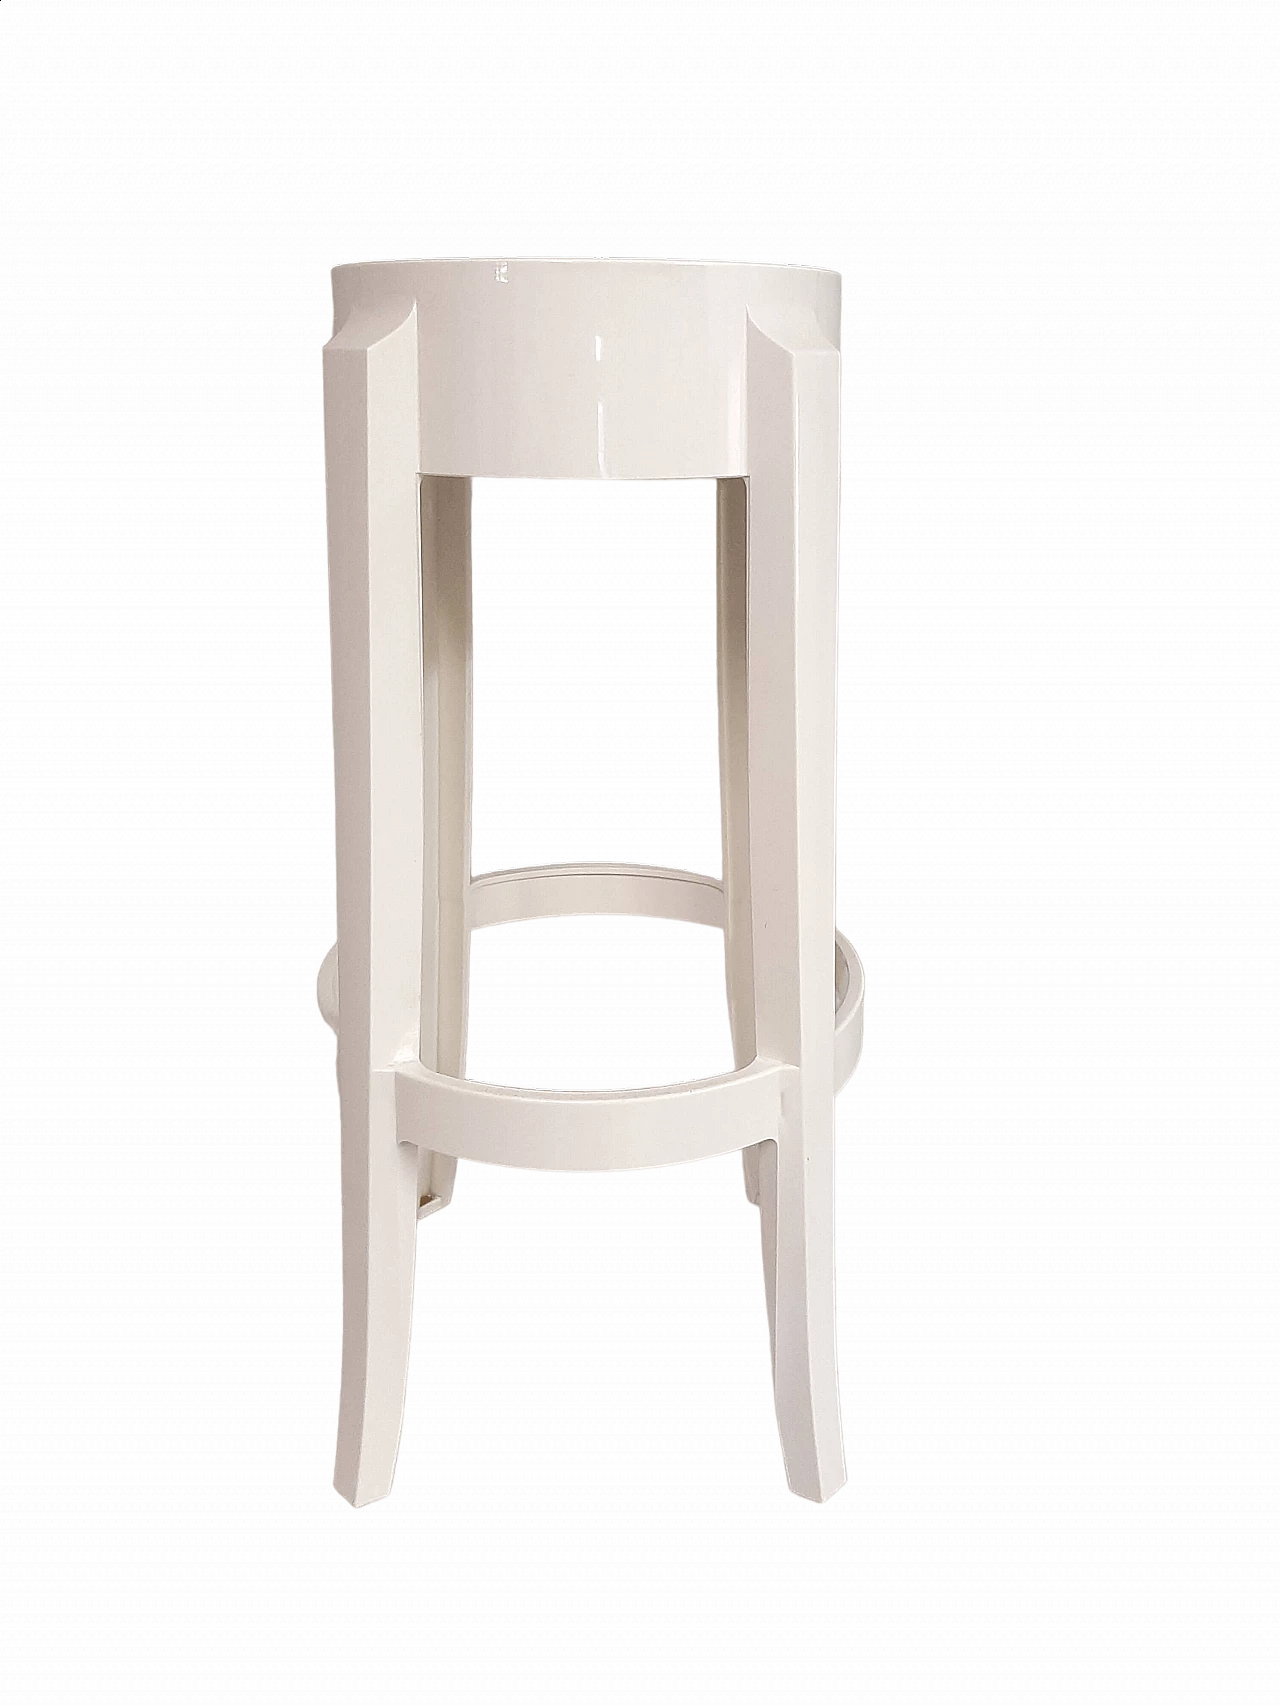 Charles Ghost stool by Philippe Starck for Kartell 7